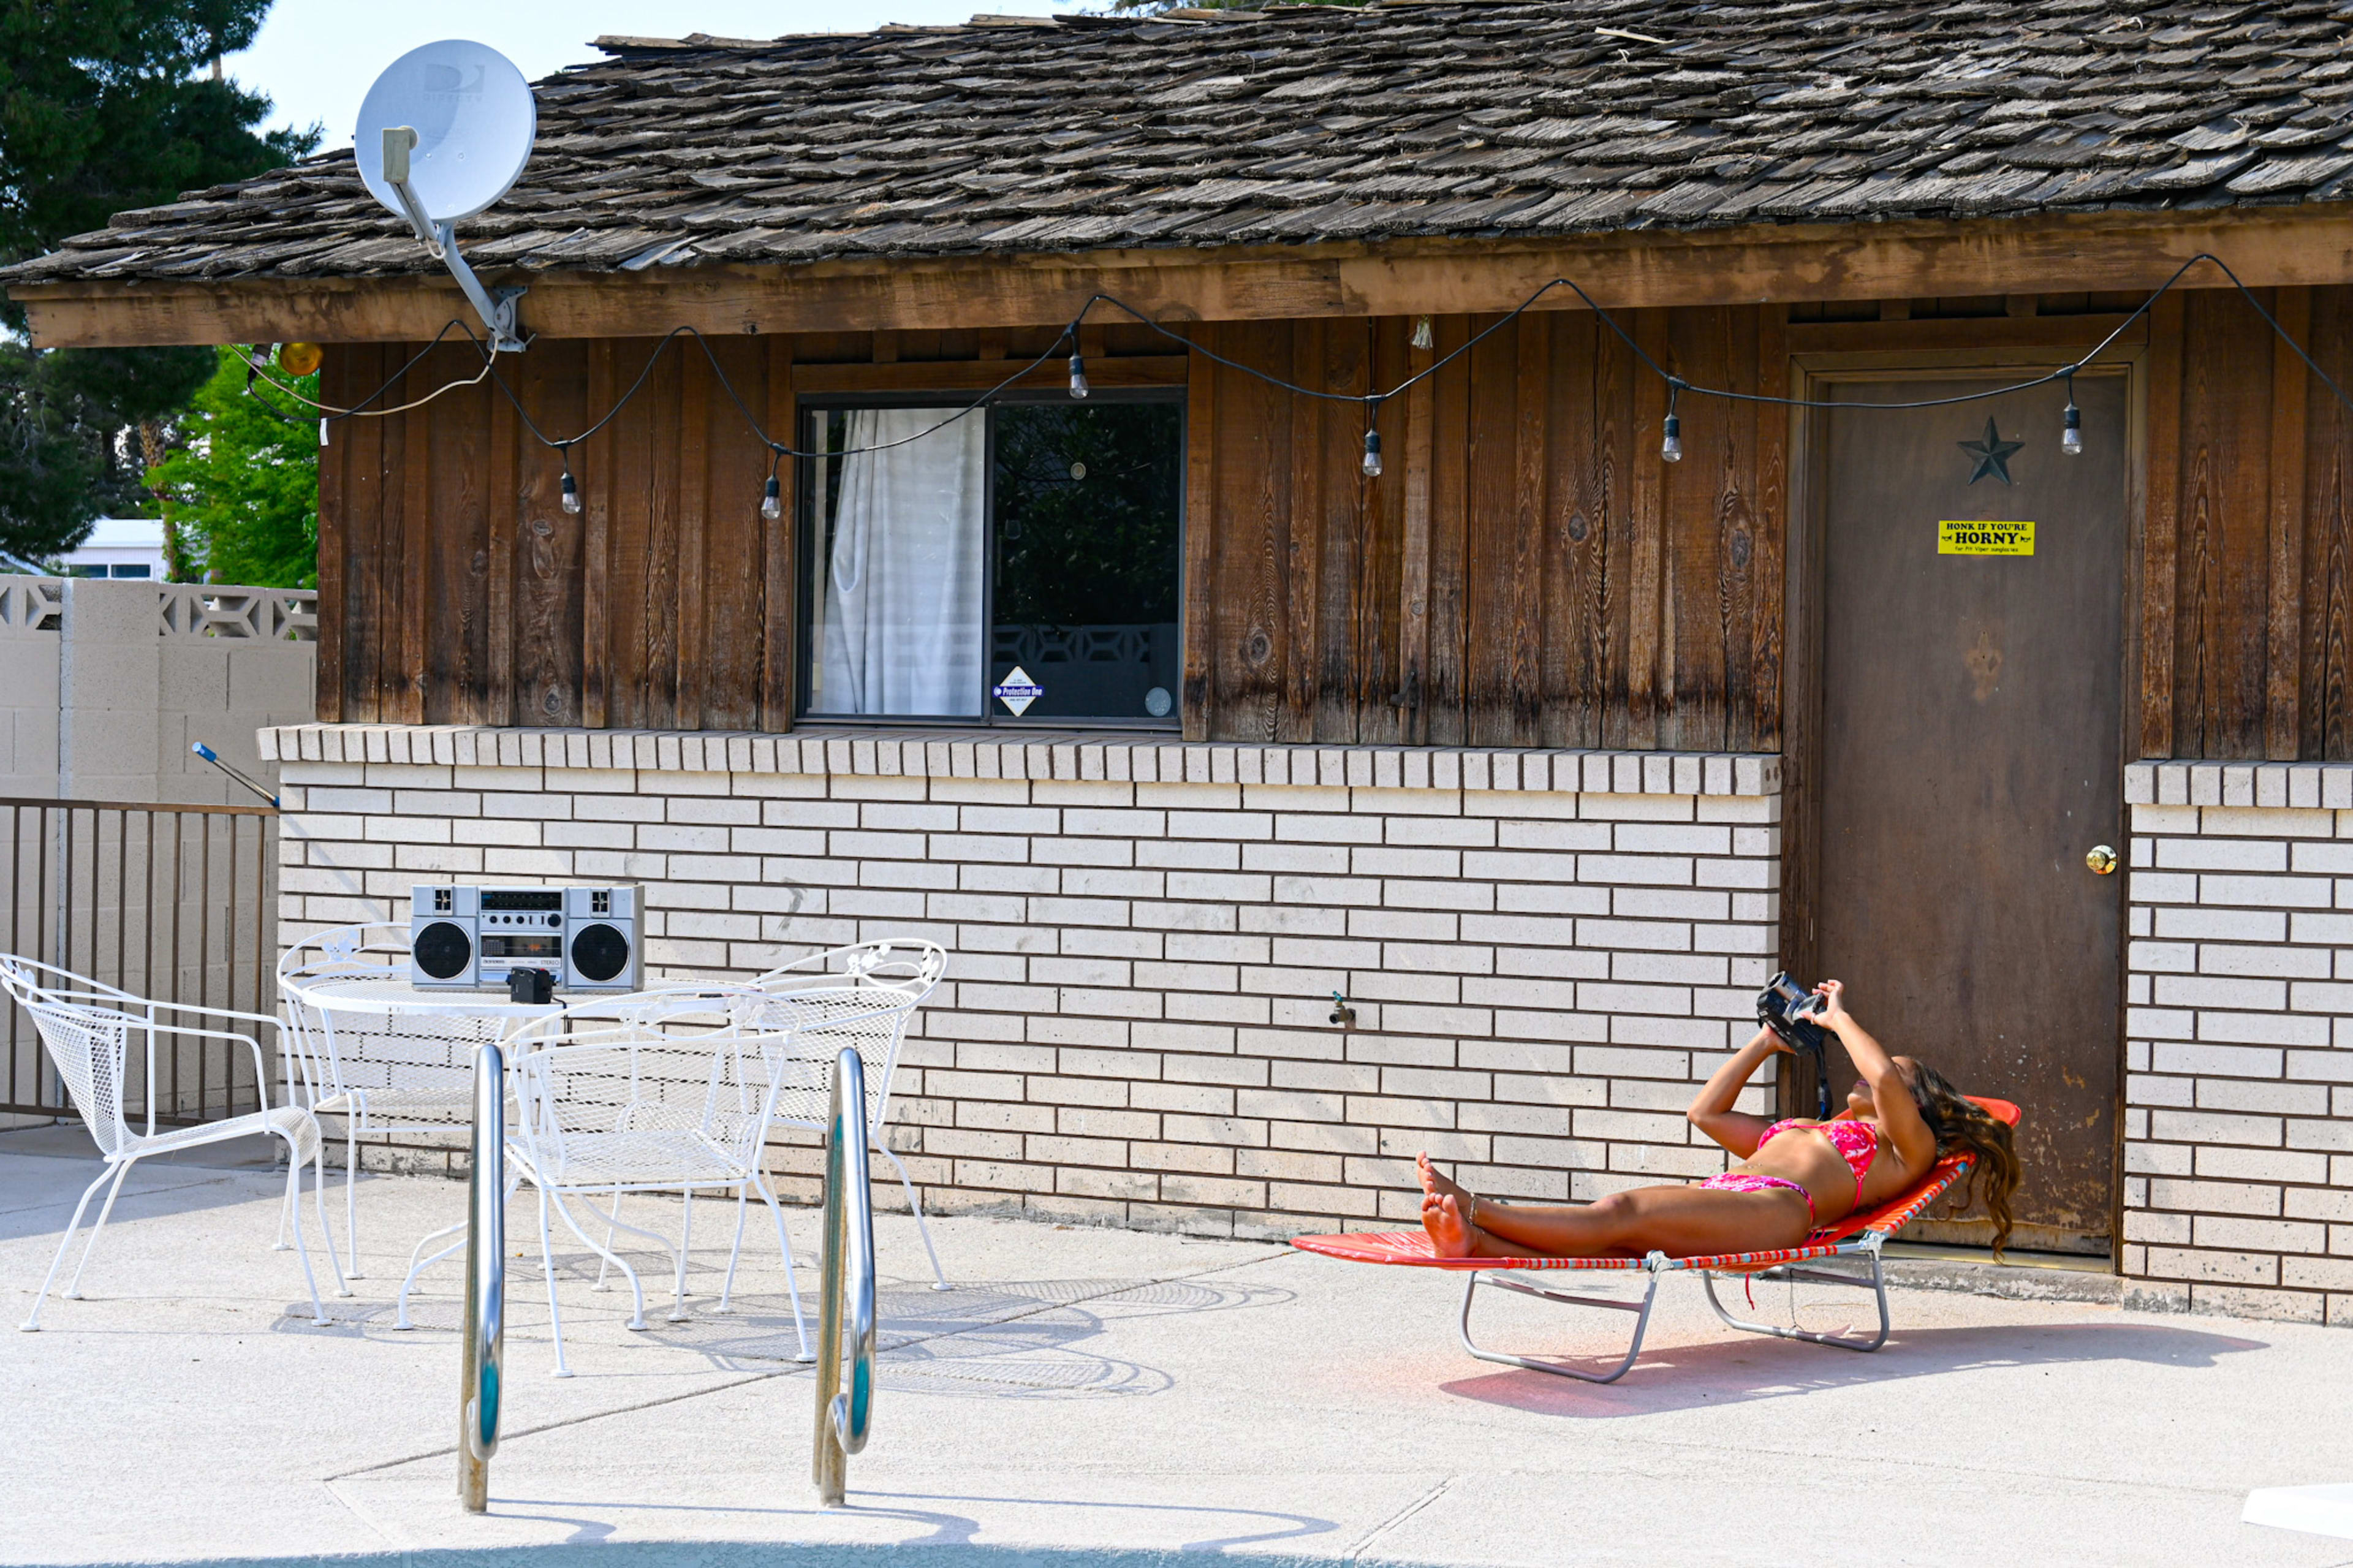 A woman in a bikini relaxing on a lawn chair outside of a rustic house.